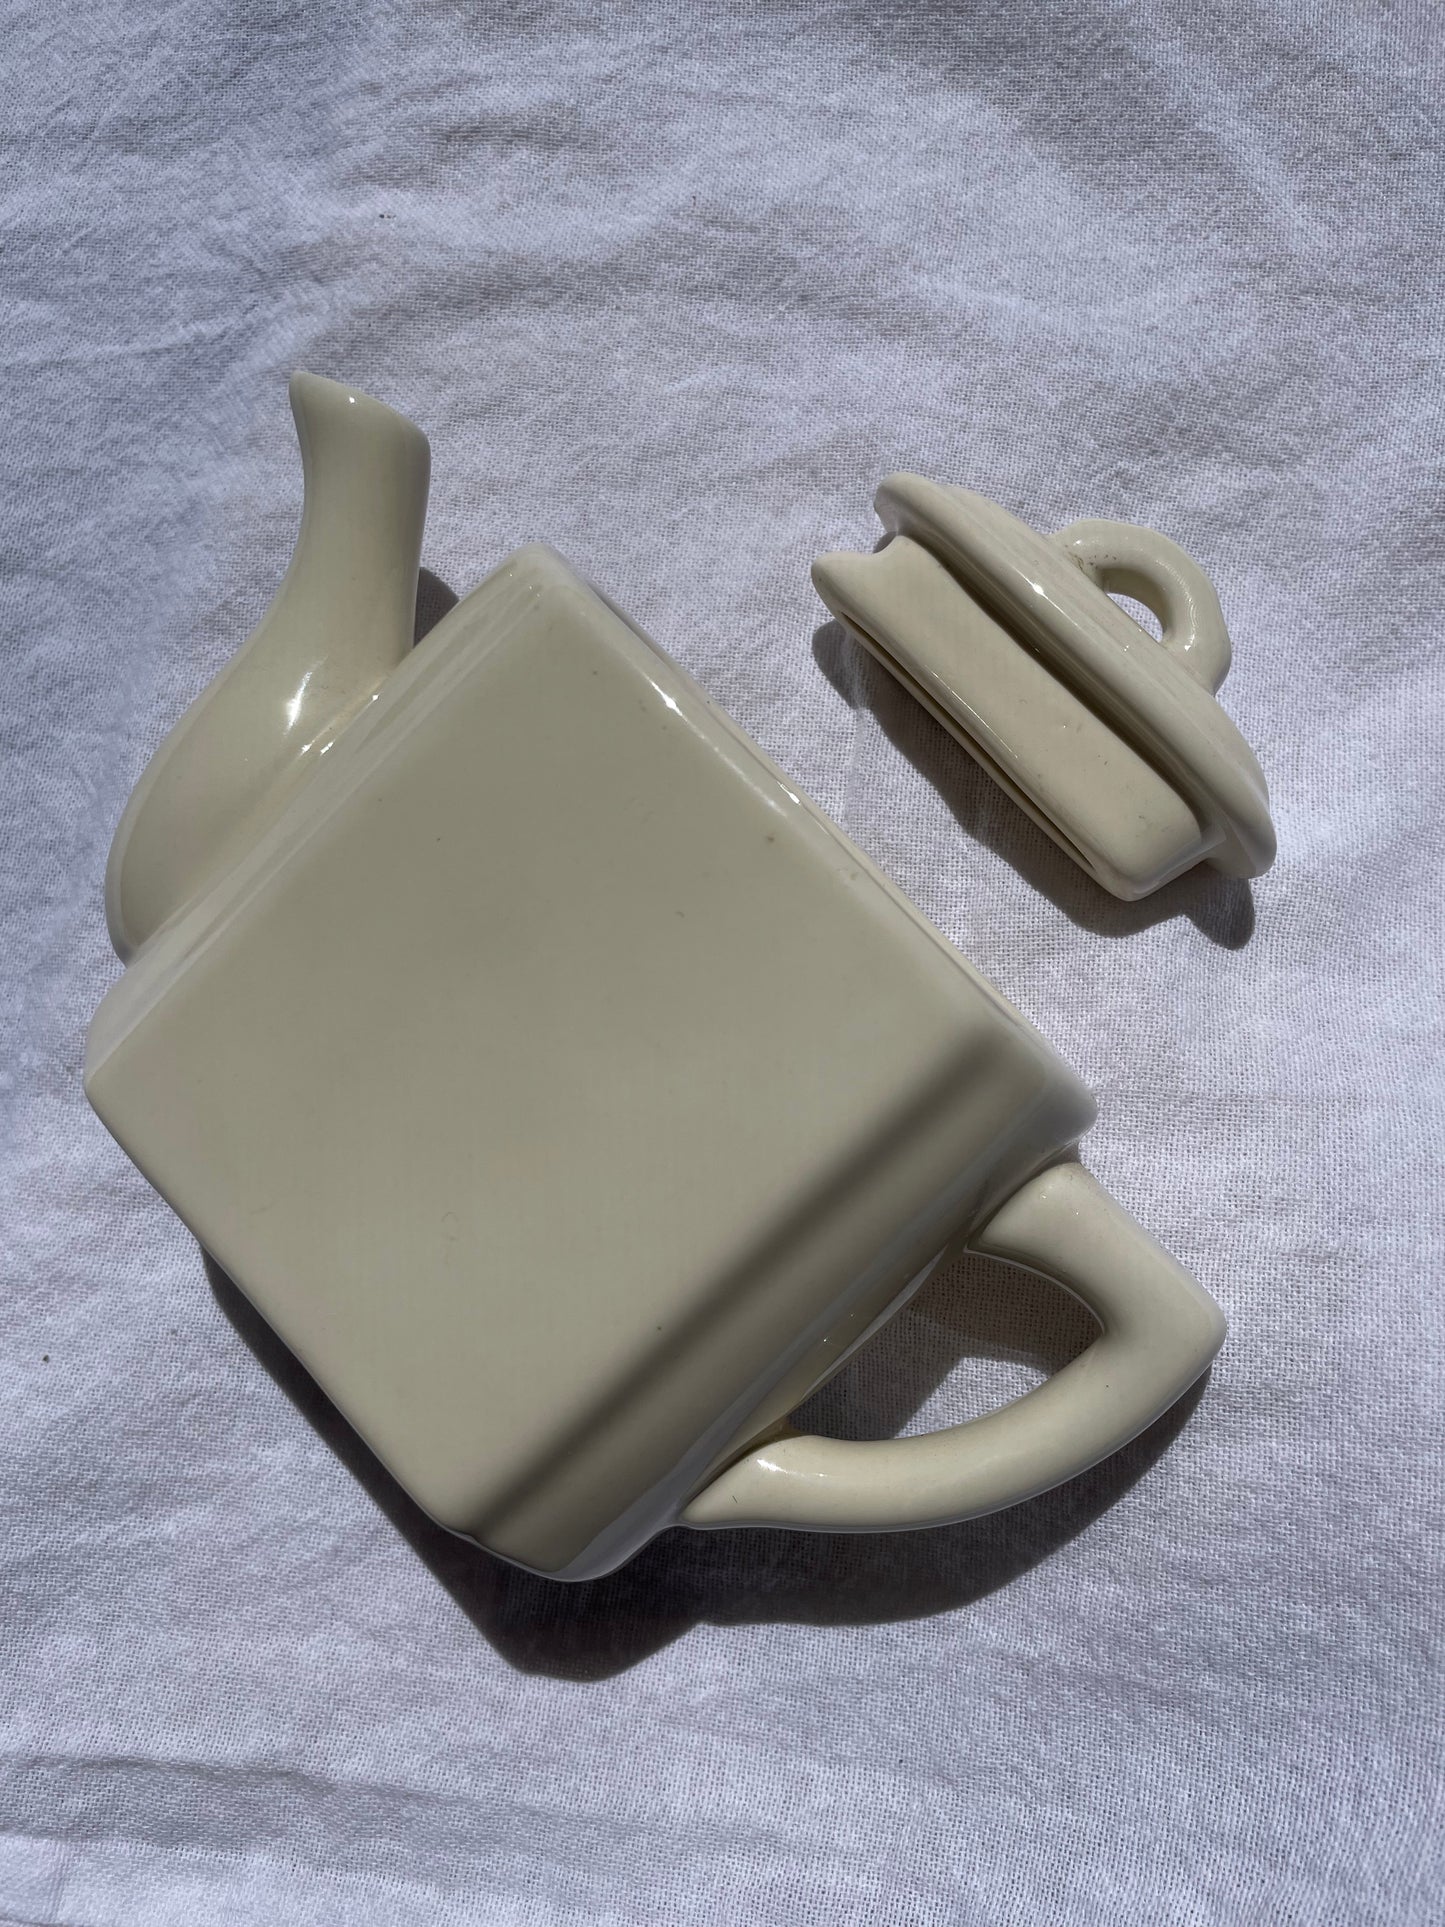 Restoration Hardware Small Teapot with Lid (2001)